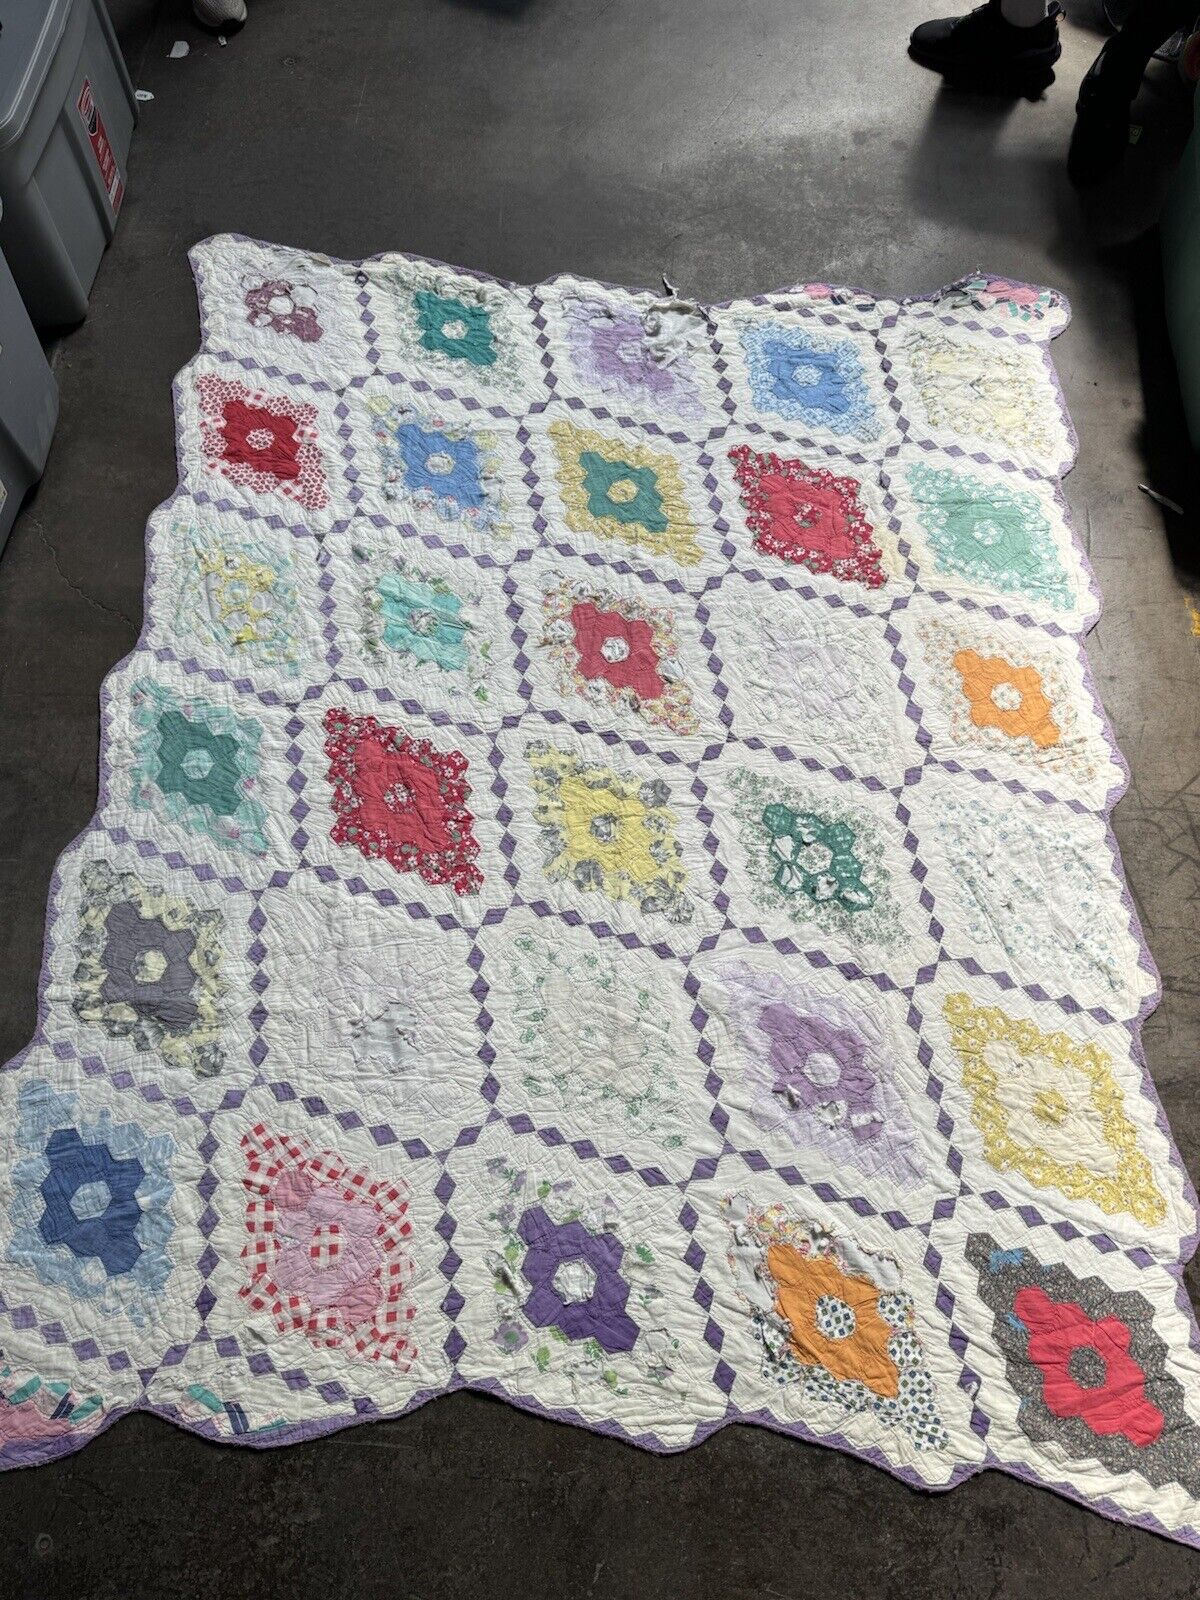 Vintage Grandmother Large Hexagon Patch Work Quilt Colorful Field Of Diamonds